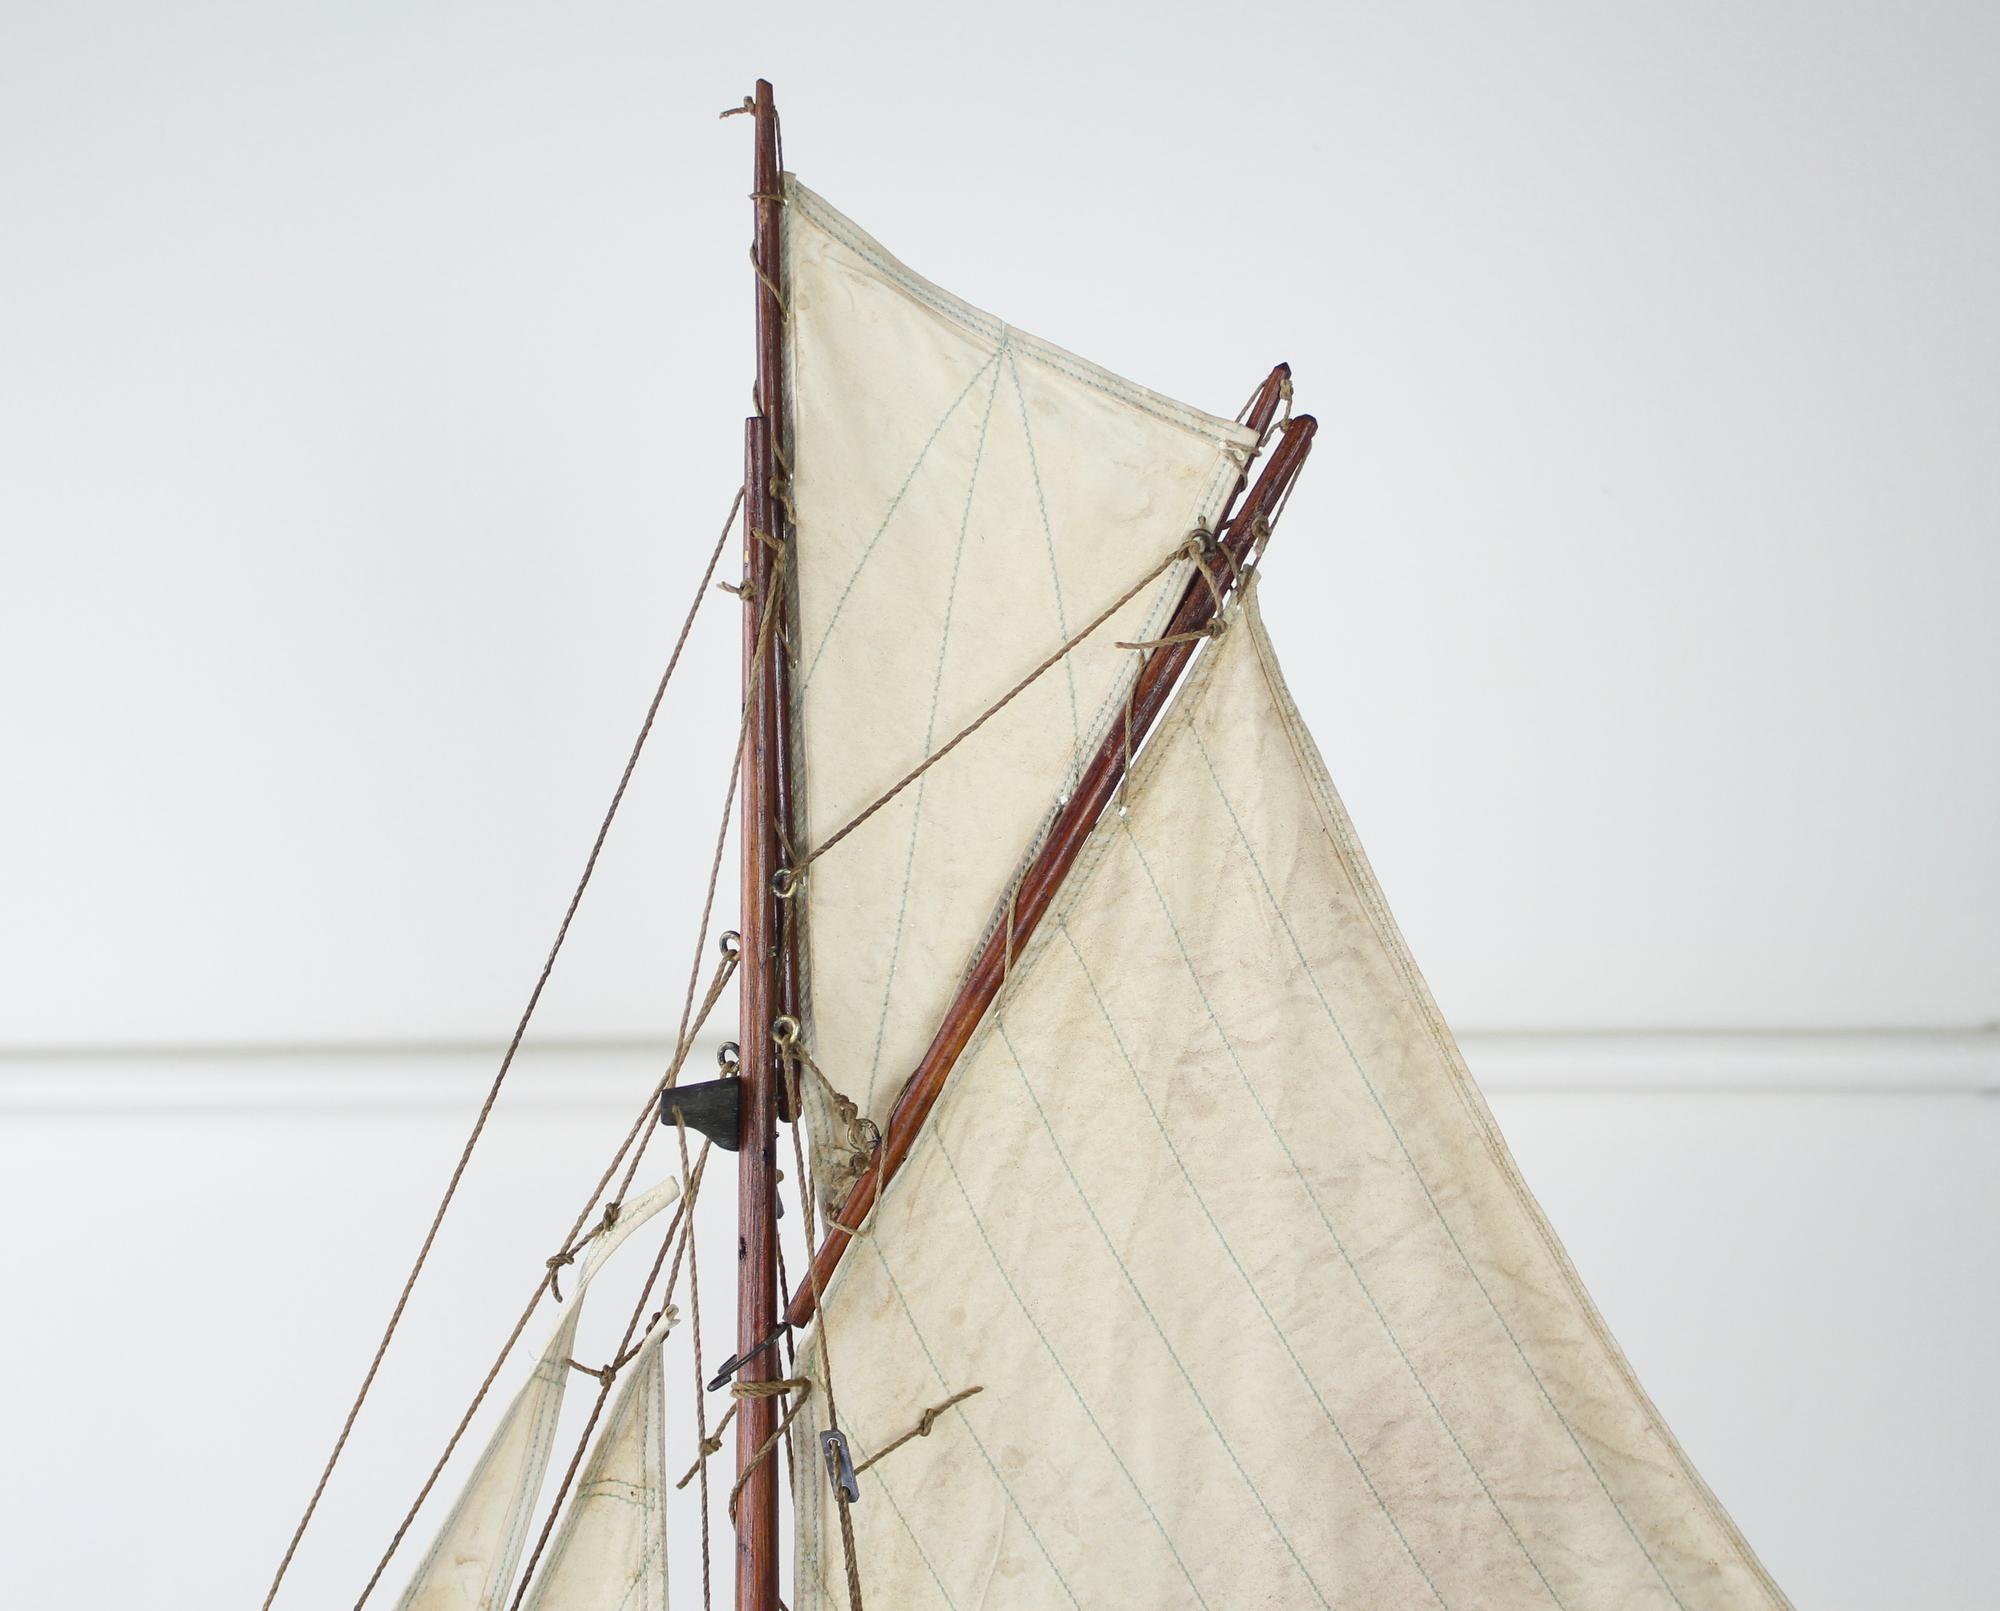 A charming vintage model yacht with sails made from old sail cloth and original brass accents. Stand is recent to hold the ship upright and stabile.
         